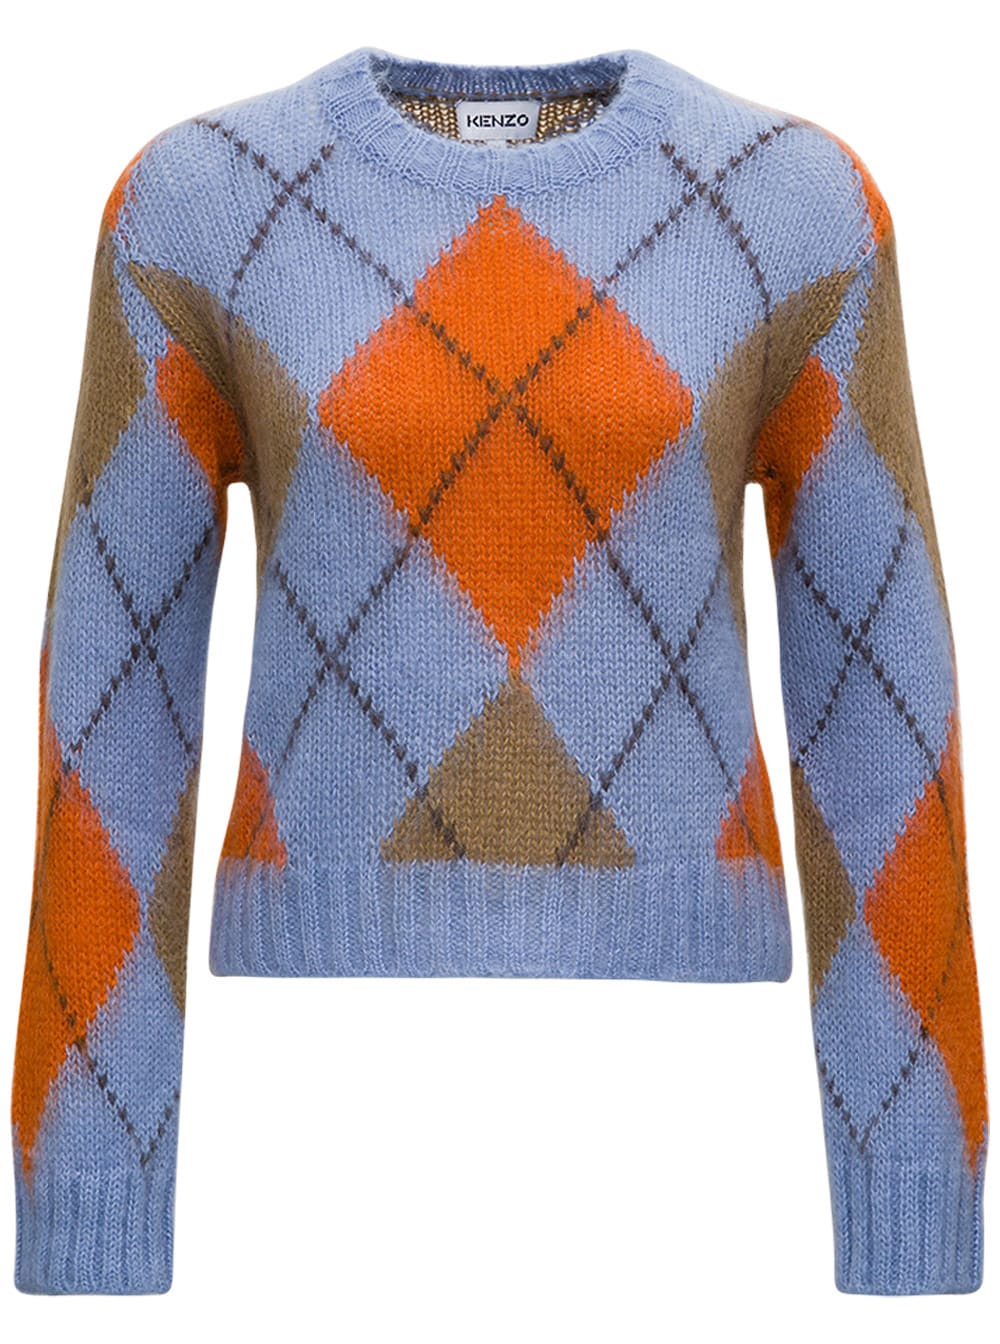 Kenzo Argyle Sweater In Mohair Blend